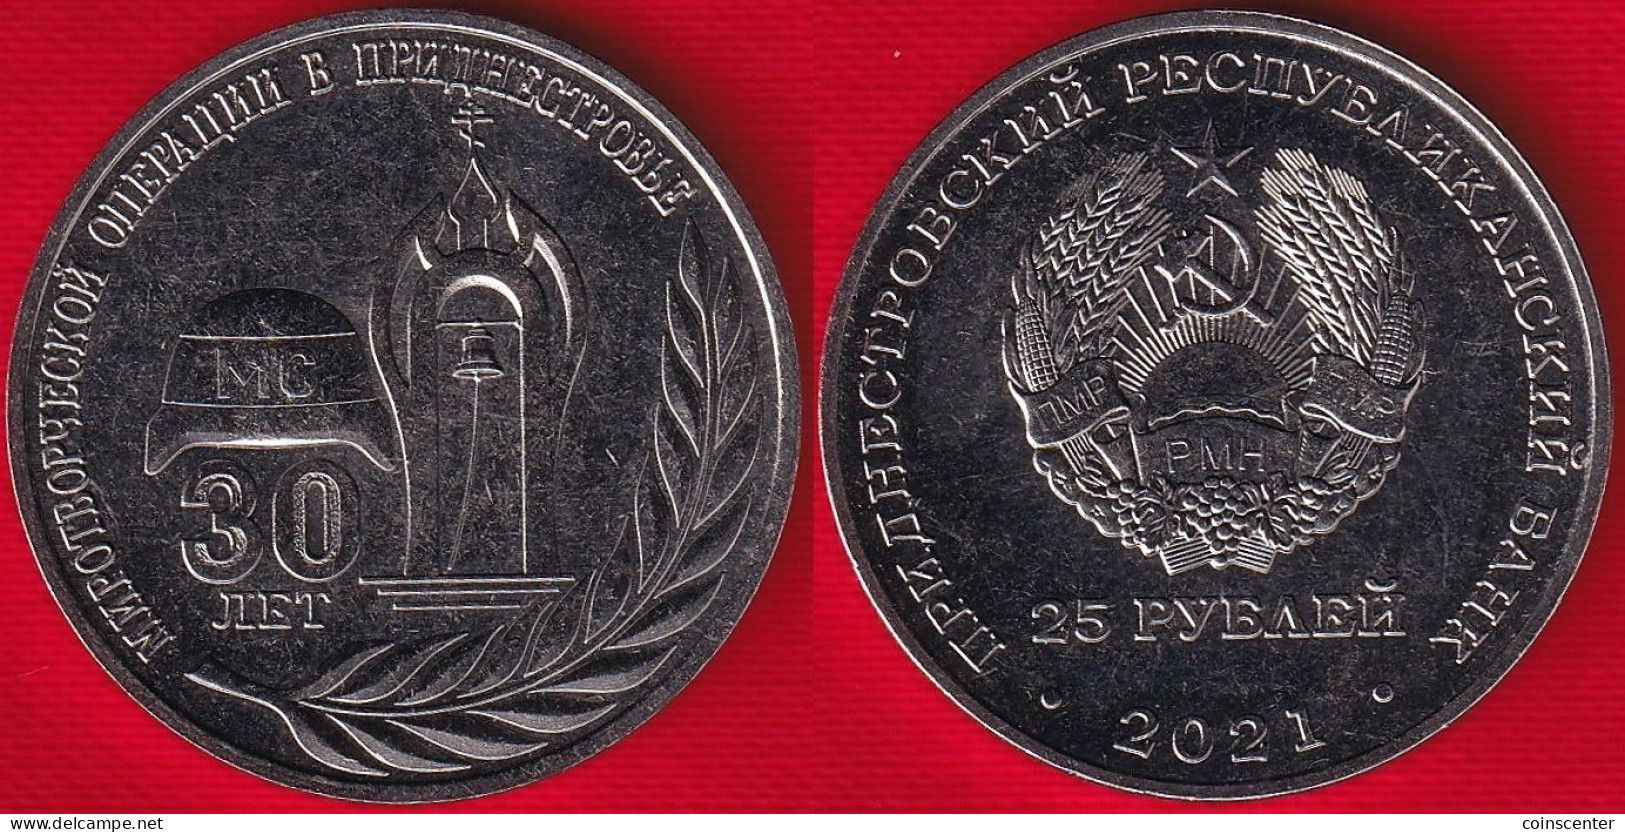 Transnistria 25 Roubles 2021 "Peacekeeping Operations" UNC - Moldova